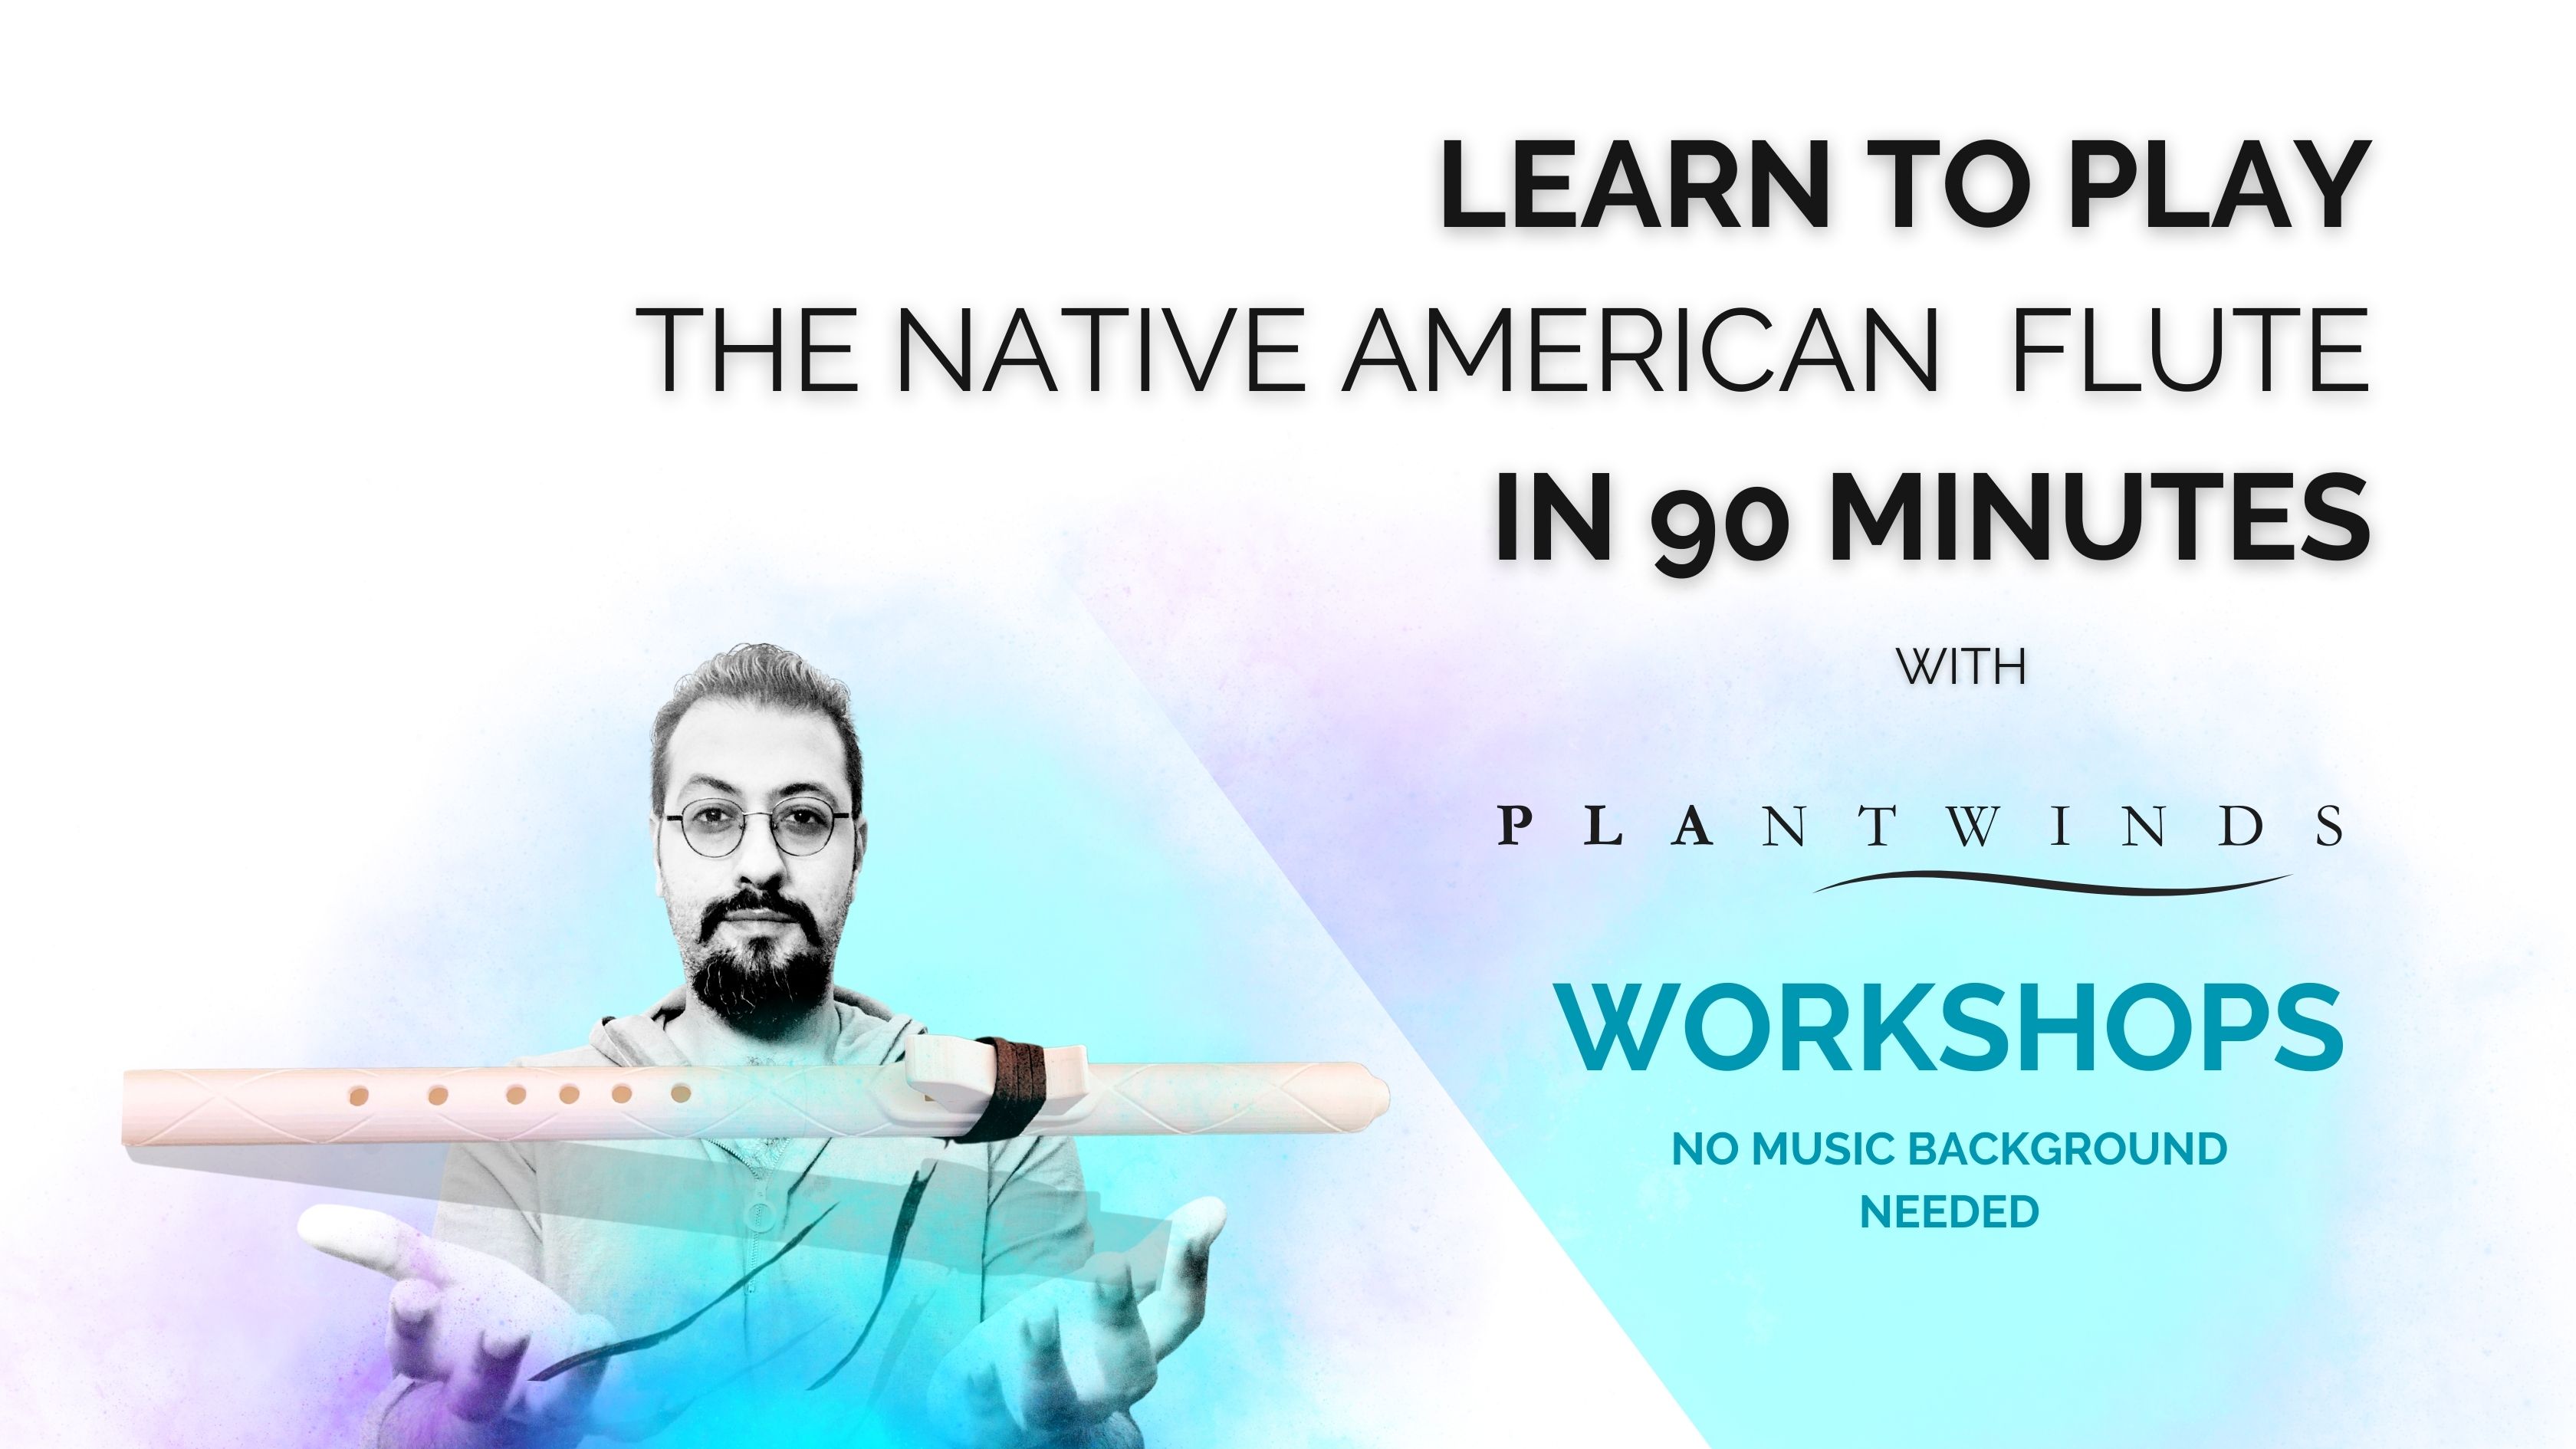 Play The Native American Flute in 90 Minutes- Plantwinds Workshop